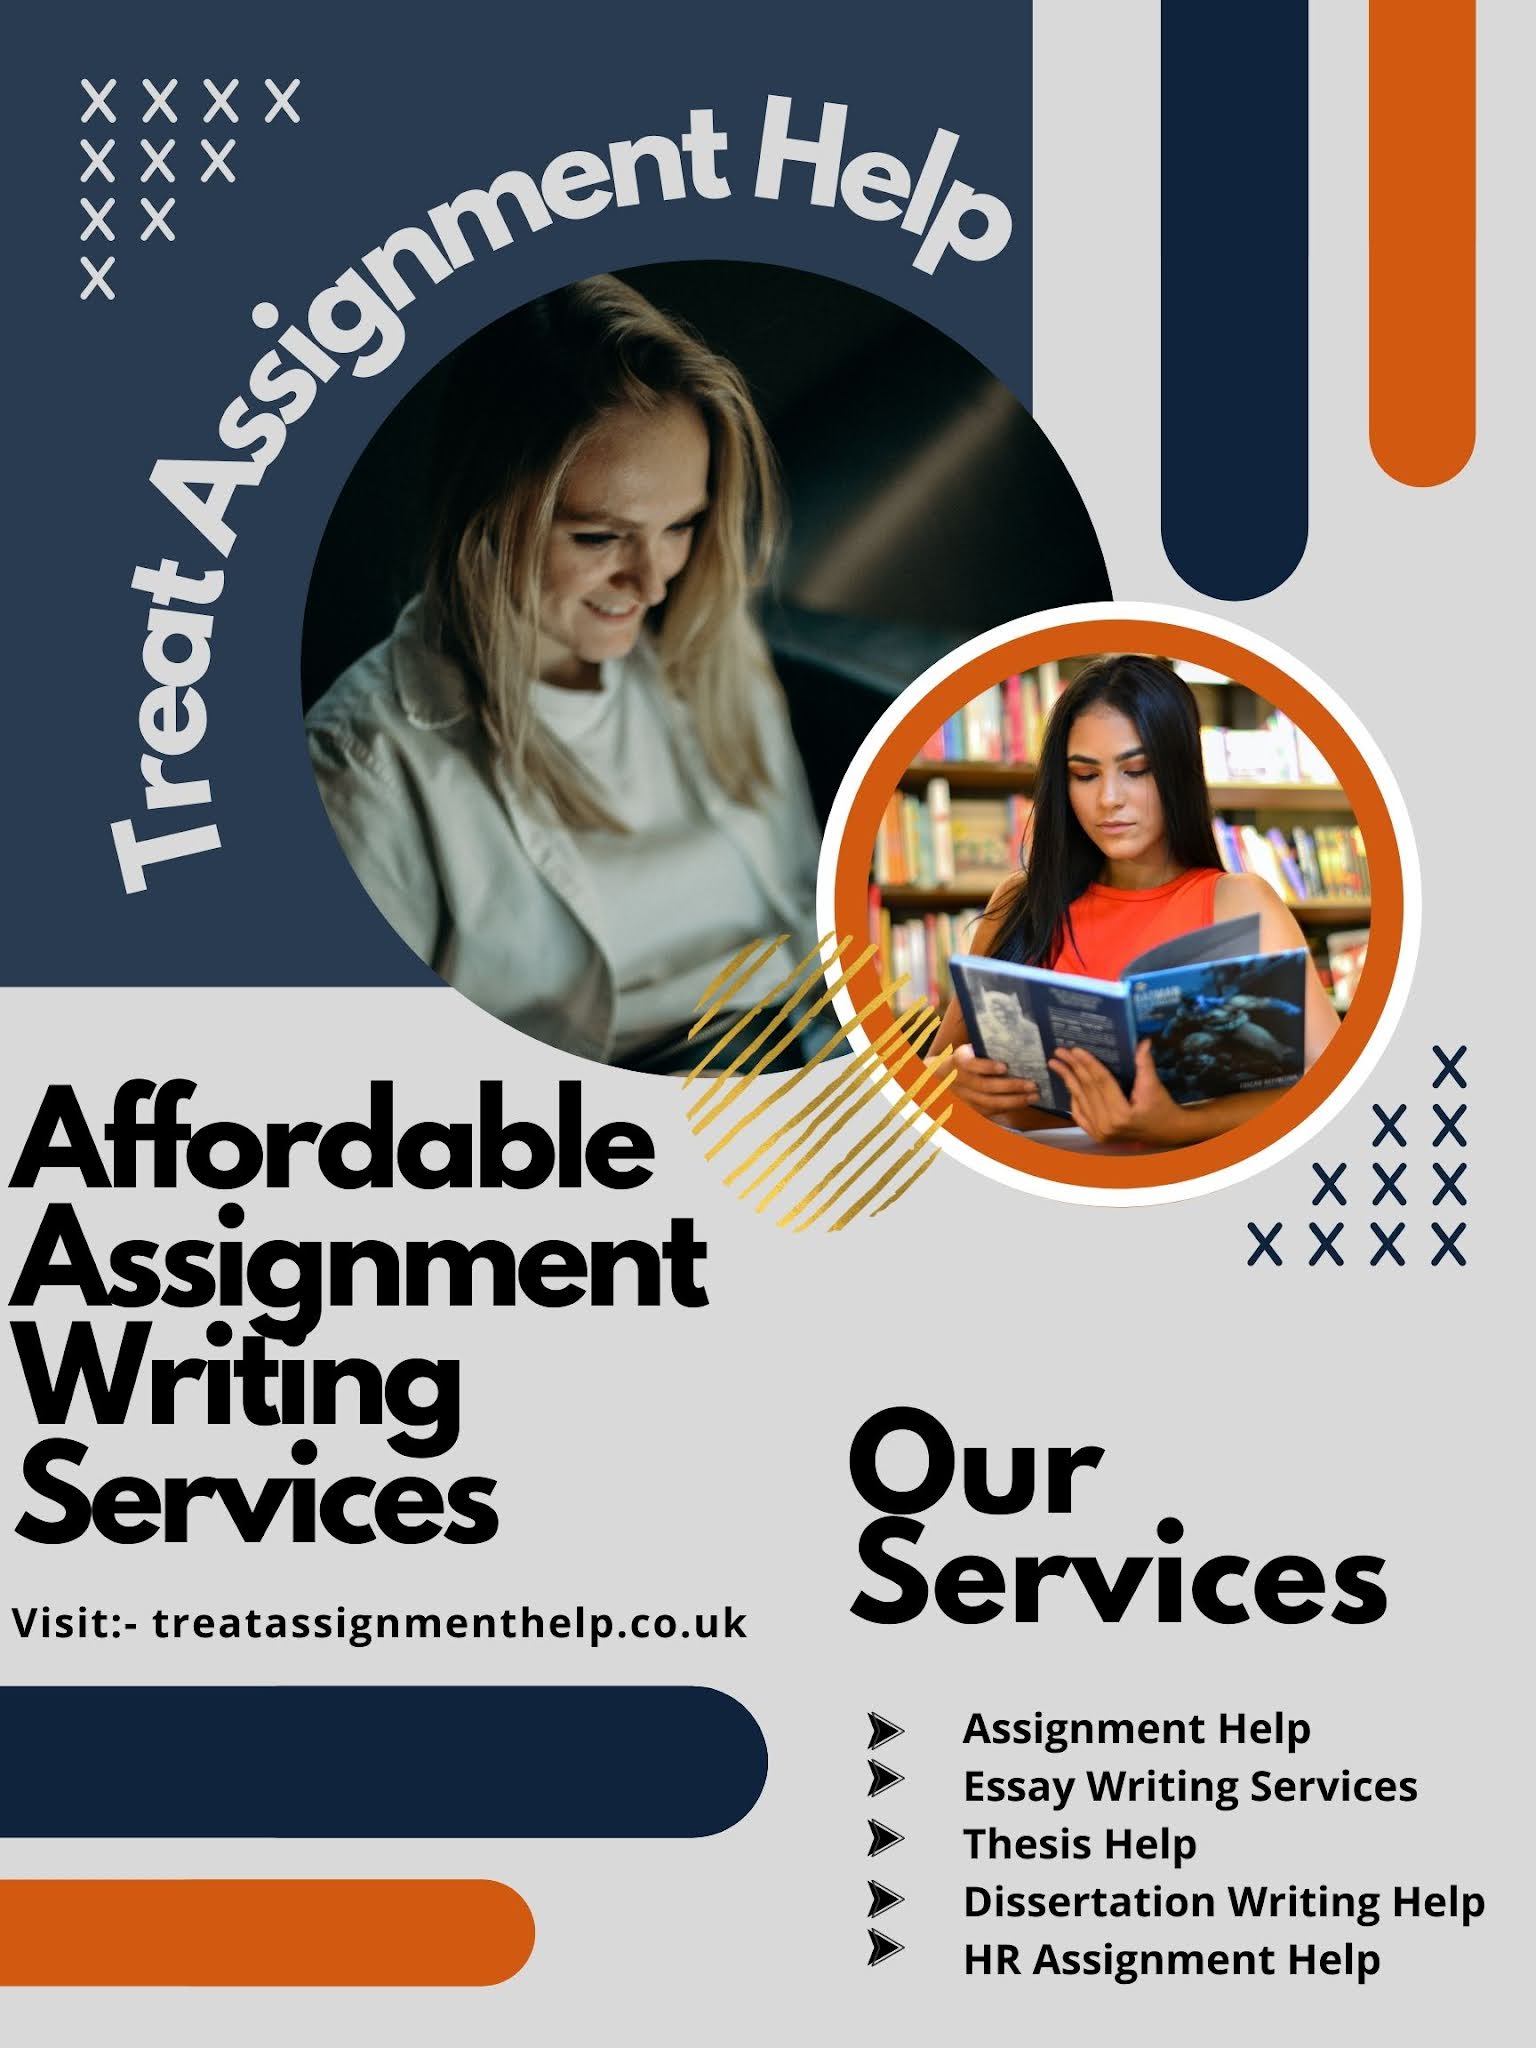 Affordable%2BAssignment%2BWriting%2BServices.jpg